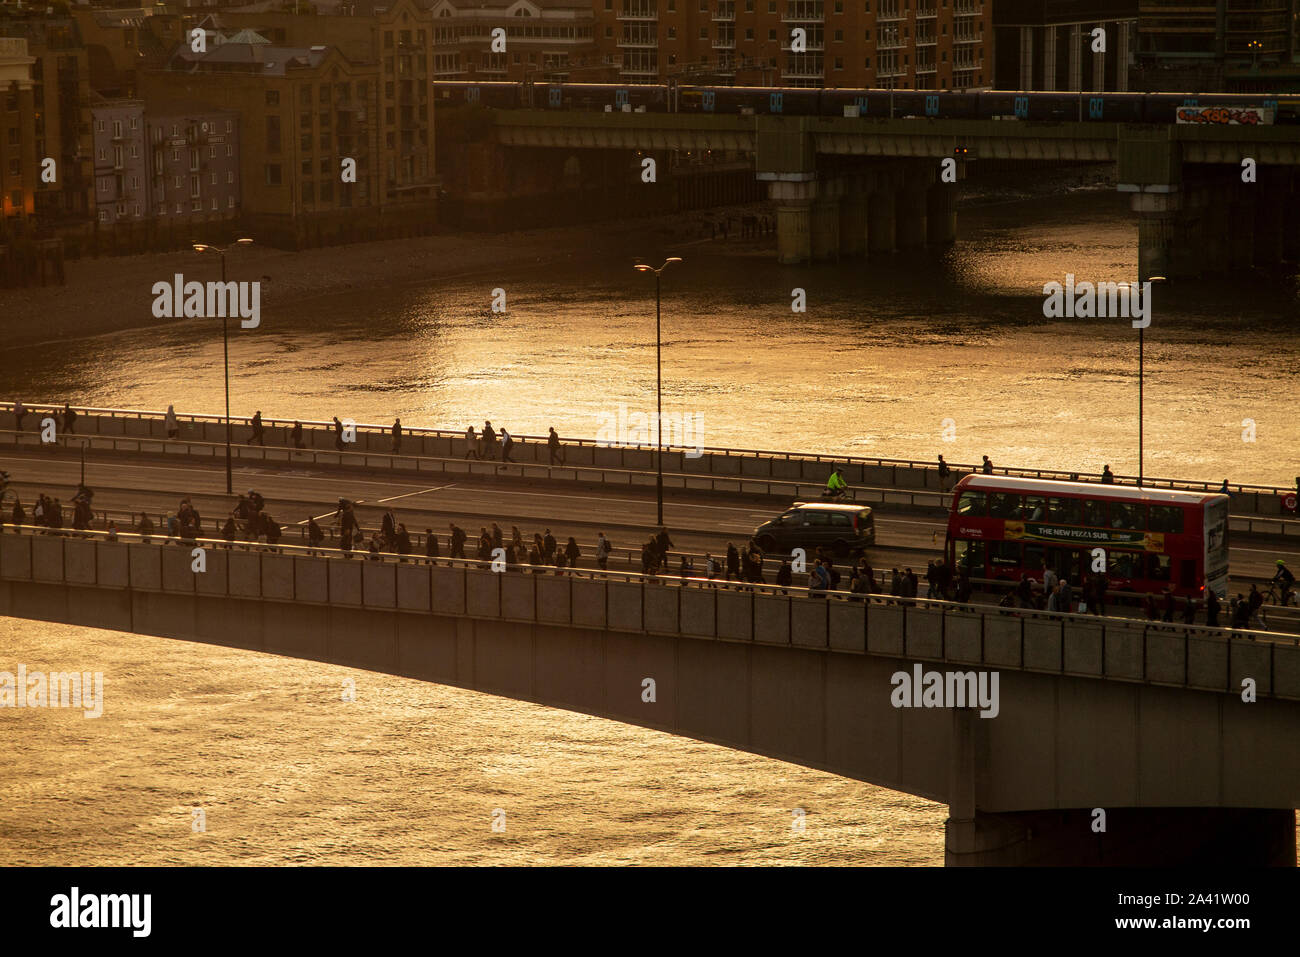 End of the working day and commuters walk over London Bridge as the sun sets Stock Photo